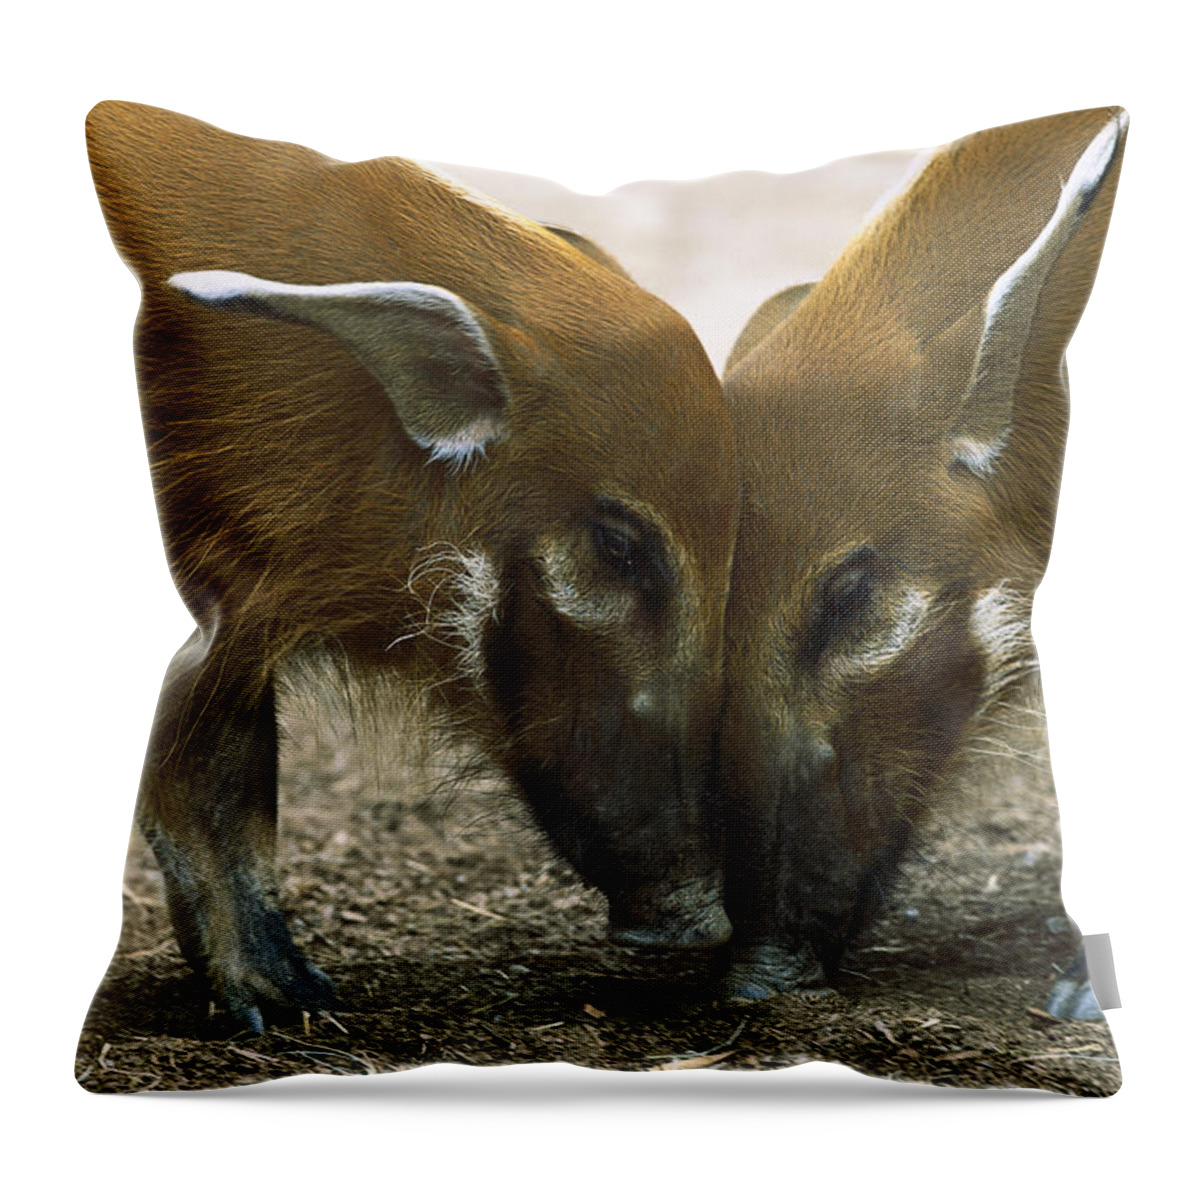 Mp Throw Pillow featuring the photograph Red River Hog Potamochoerus Porcus Pair #1 by San Diego Zoo